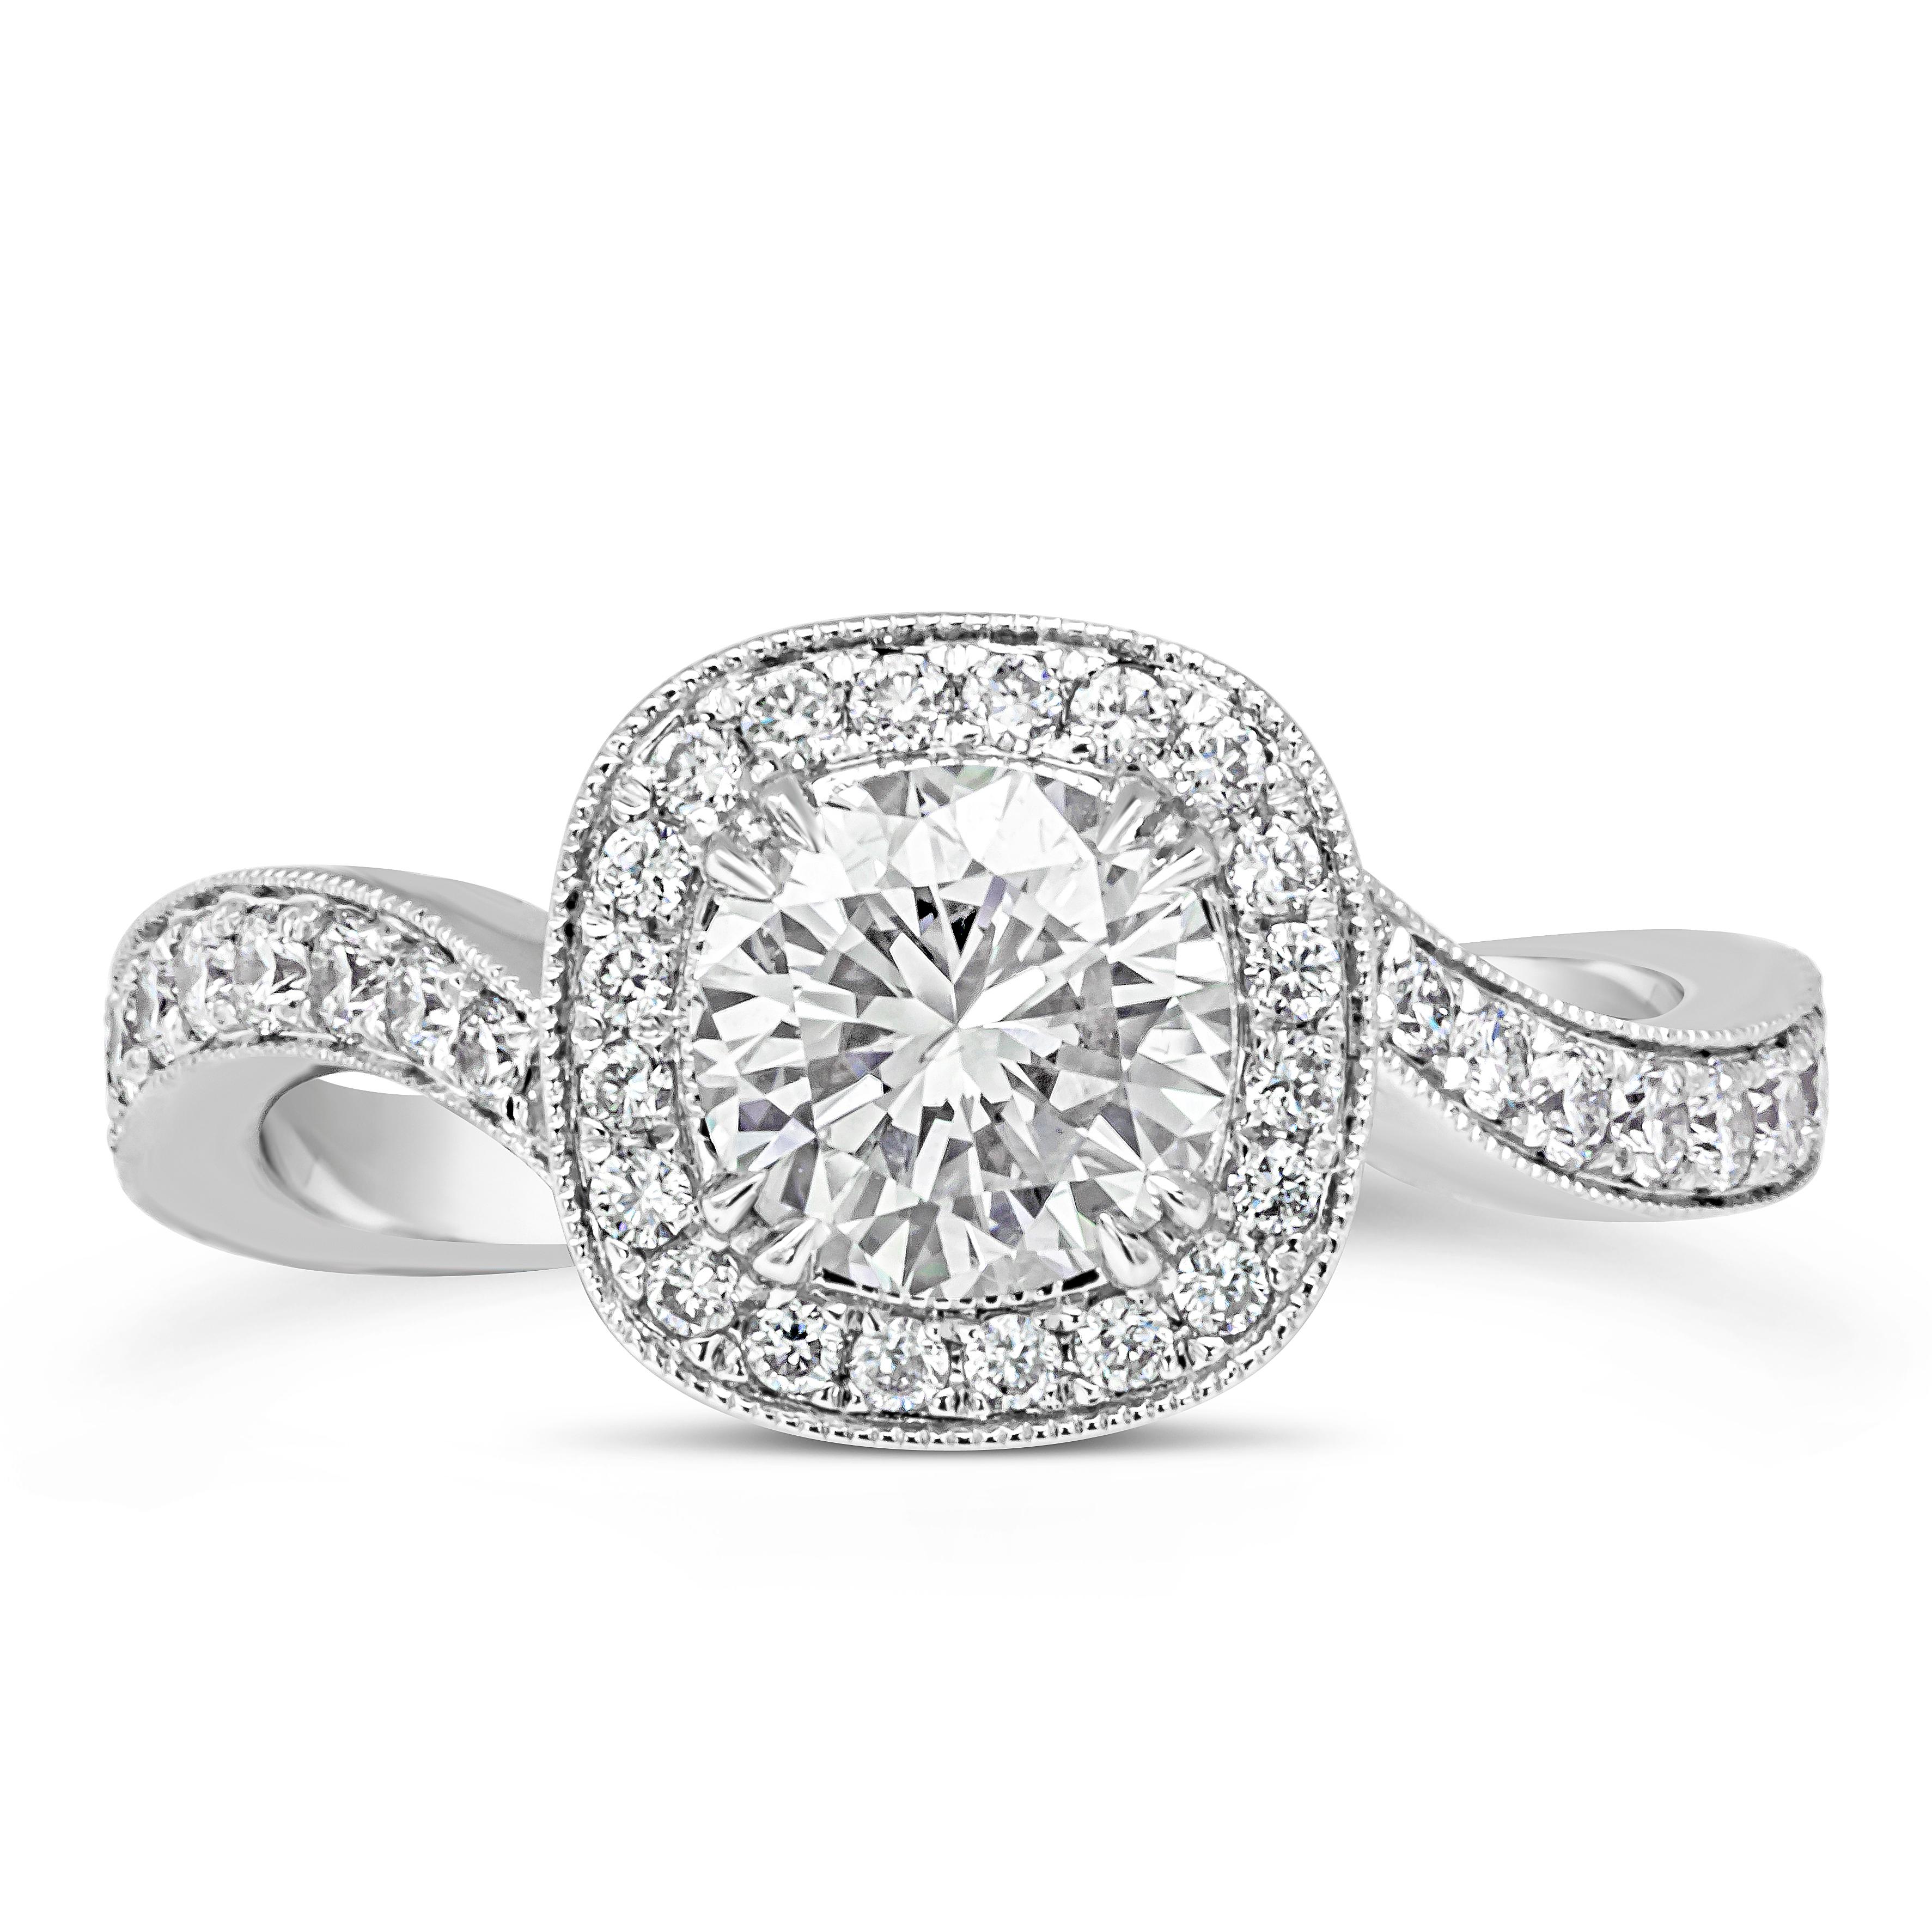 An unusual and intricately designed engagement ring and wedding band set. The engagement ring features a 0.98 carat round brilliant diamond center set in a diamond encrusted cushion halo finished with milgrain edges. The halo is attached to a wavy